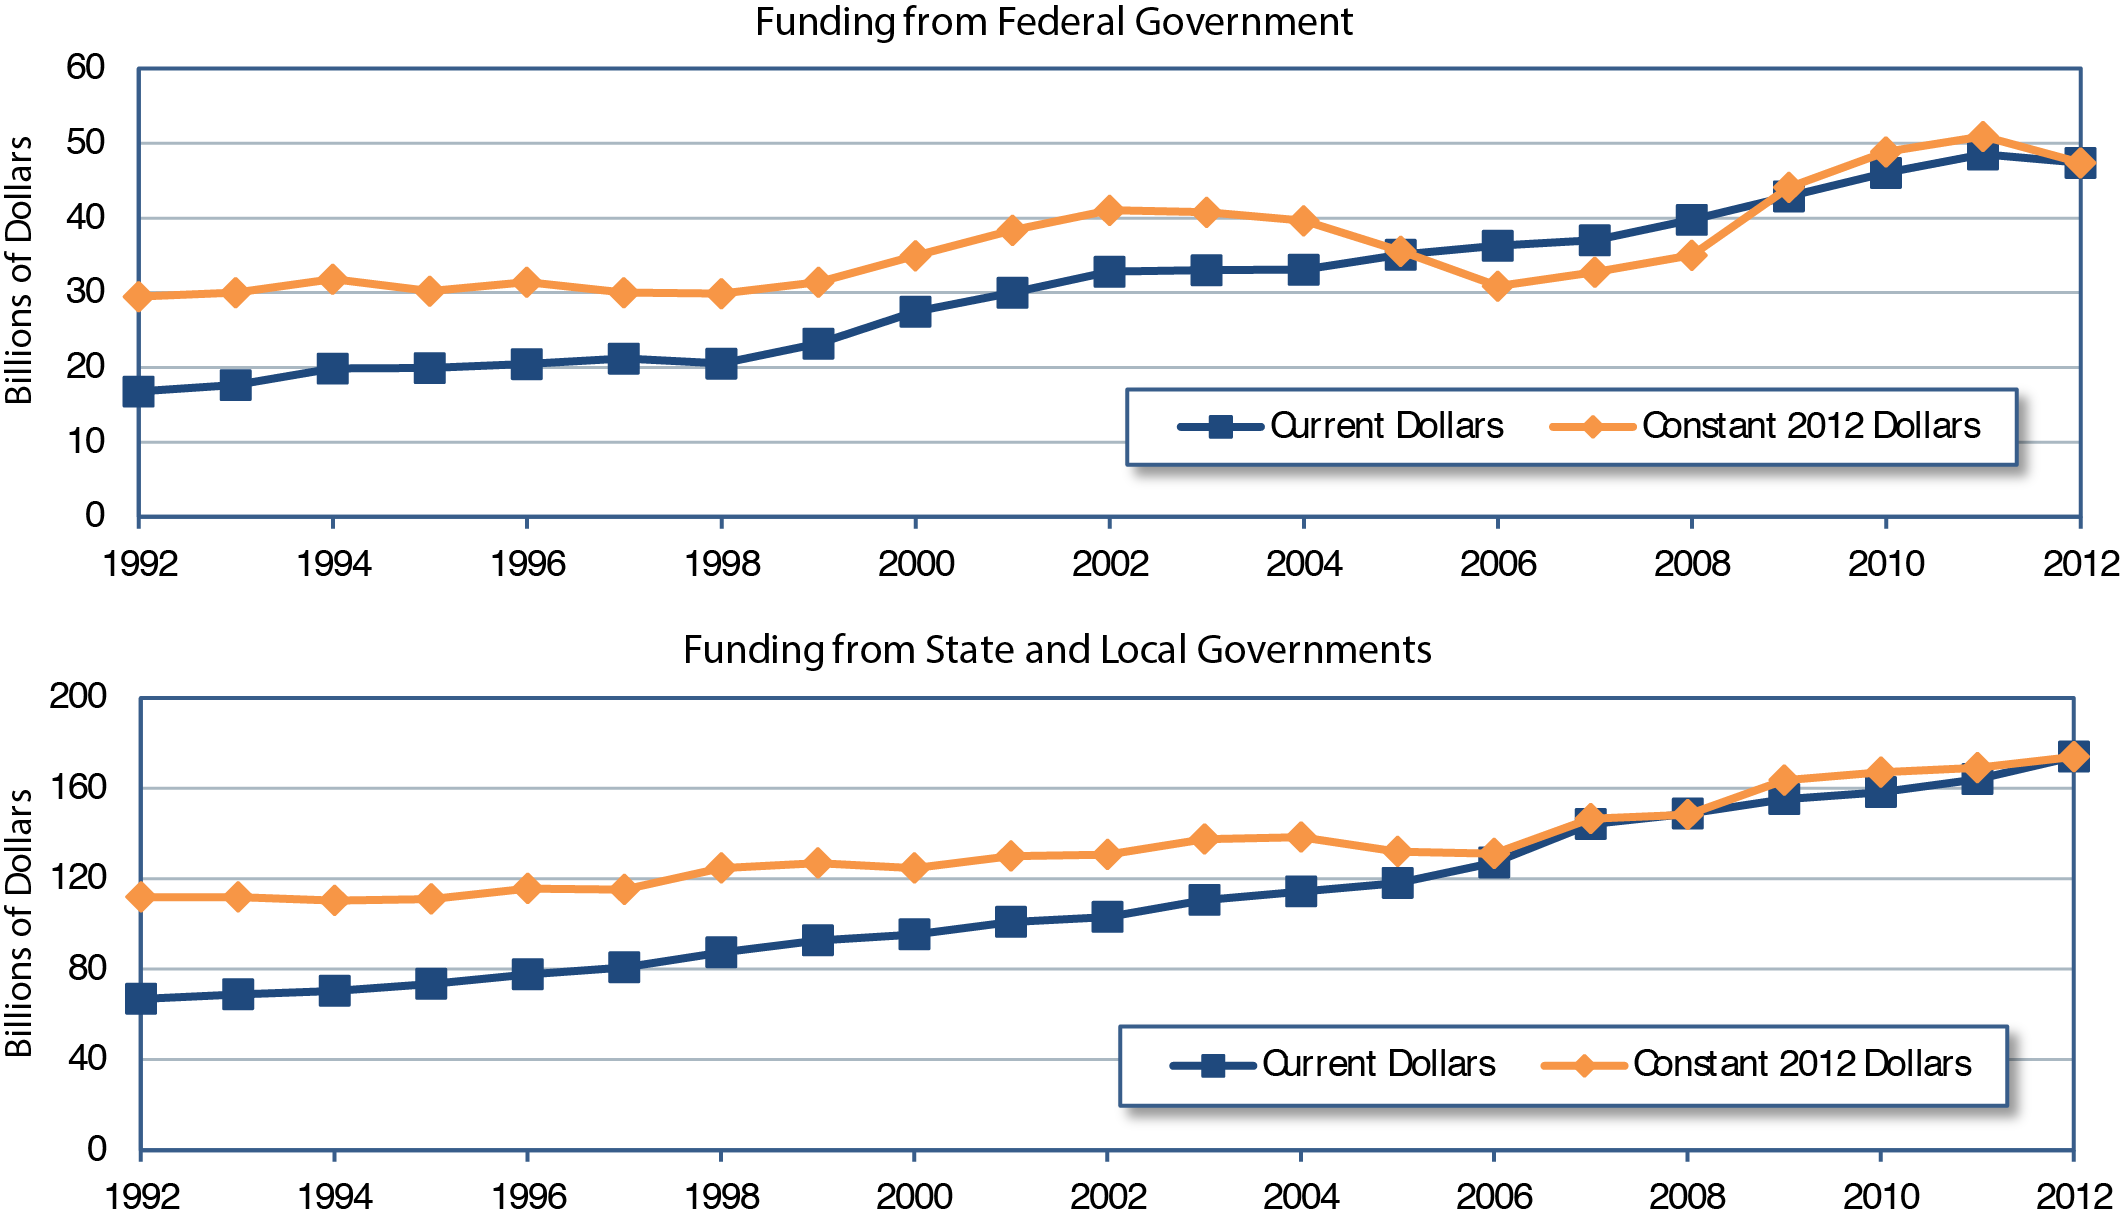 A set of two line graphs plotting values in billions of dollars for a comparison of current dollars and constant 2012 dollars in expenditures. Under funding from Federal government, the plot of current dollars has an initial value of 16.8 billion in the year 1992, trends upward to a value of 19.9 billion for the year 1994, and increases steadily to a value of 47.4 billion in the year 2012. The plot of constant 2012 dollars has an initial value of 29.5 billion in the year 1992, trends upward to a value of 31.8 billion in the year 1994, reaches a value of 41.1 billion in 2002, swings downward to a value of 30.9 billion in the year 2006, and swings upward to 50.9 billion in 2011, and ending at a value of 47.4 billion in the year 2012. Under funding from state and local governments, the plot of current dollars has an initial value of 66.7 billion in the year 1992, trends upward to a value of 87.4 billion in the year 1998, increases steadily to a value of 118.1 billion in the year 2005, ending at a value of 173.9 billion in the year 2012. The plot of constant 2012 dollars has an initial value of 111.9 billion in the year 1992, trends upward to a value of 124.7 billion in 1998, reaches a value of 138.3 billion in the year 2004 before swinging downward to a value of 131 billion in the year 2006, and climbs to an ending value of 173.9 billion in the year 2012. <em>Sources: Highway Statistics, various years, Tables HF-10A, HF-10, PT-1; http://www.bls.gov/cpi/.